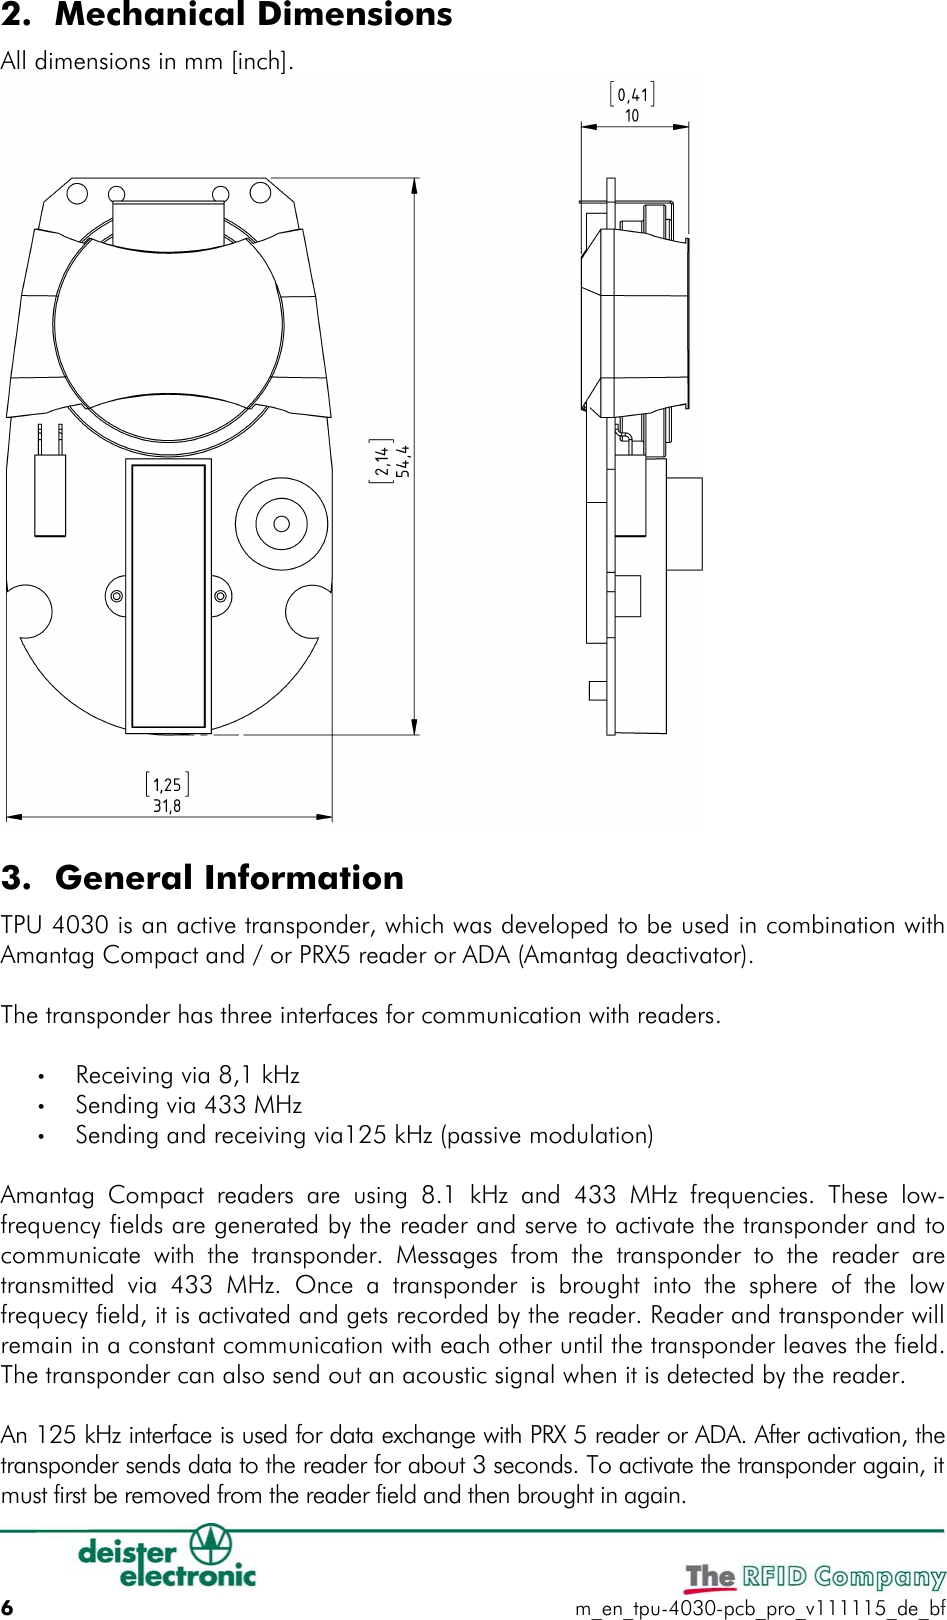 2. Mechanical DimensionsAll dimensions in mm [inch].3. General InformationTPU 4030 is an active transponder, which was developed to be used in combination with Amantag Compact and / or PRX5 reader or ADA (Amantag deactivator).The transponder has three interfaces for communication with readers.•Receiving via 8,1 kHz •Sending via 433 MHz •Sending and receiving via125 kHz (passive modulation) Amantag Compact readers are using  8.1 kHz and  433 MHz  frequencies. These low-frequency fields are generated by the reader and serve to activate the transponder and to communicate with the transponder. Messages from  the transponder  to the reader are transmitted via 433  MHz.  Once a  transponder is brought into the sphere of the  low frequecy field, it is activated and gets recorded by the reader. Reader and transponder will remain in a constant communication with each other until the transponder leaves the field. The transponder can also send out an acoustic signal when it is detected by the reader.An 125 kHz interface is used for data exchange with PRX 5 reader or ADA. After activation, the transponder sends data to the reader for about 3 seconds. To activate the transponder again, it must first be removed from the reader field and then brought in again.6m_en_tpu-4030-pcb_pro_v111115_de_bf